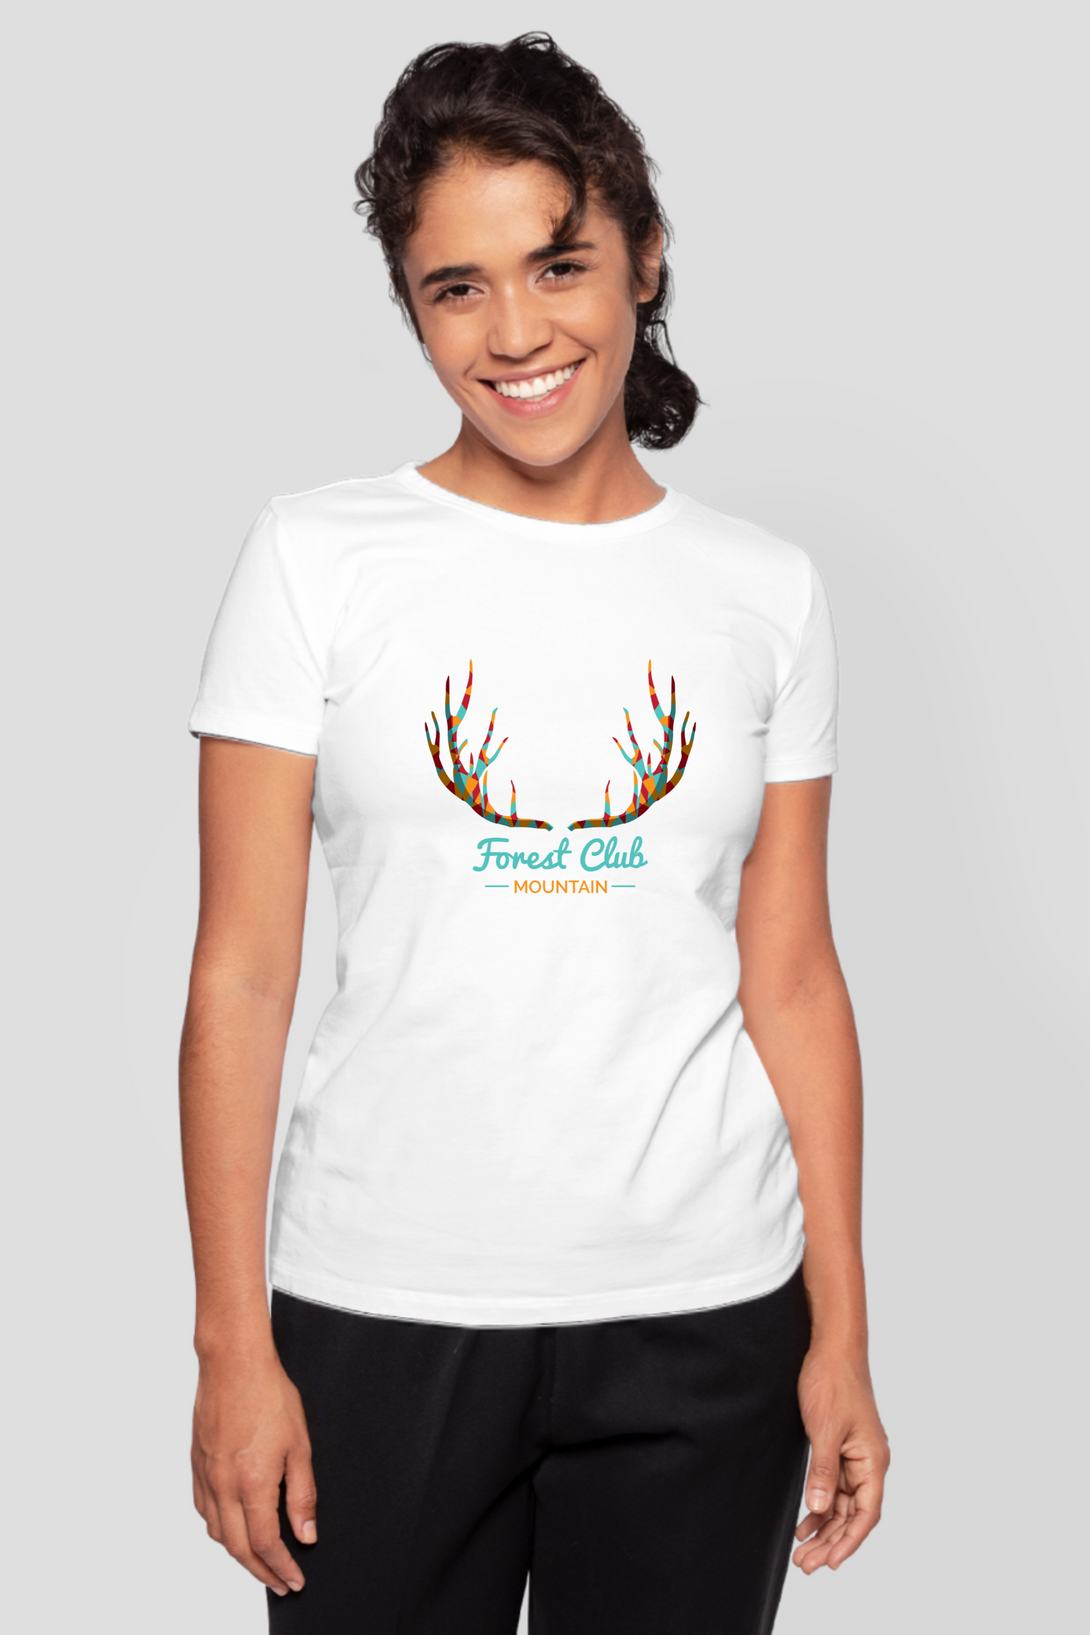 Forest Club Printed T-Shirt For Women - WowWaves - 9